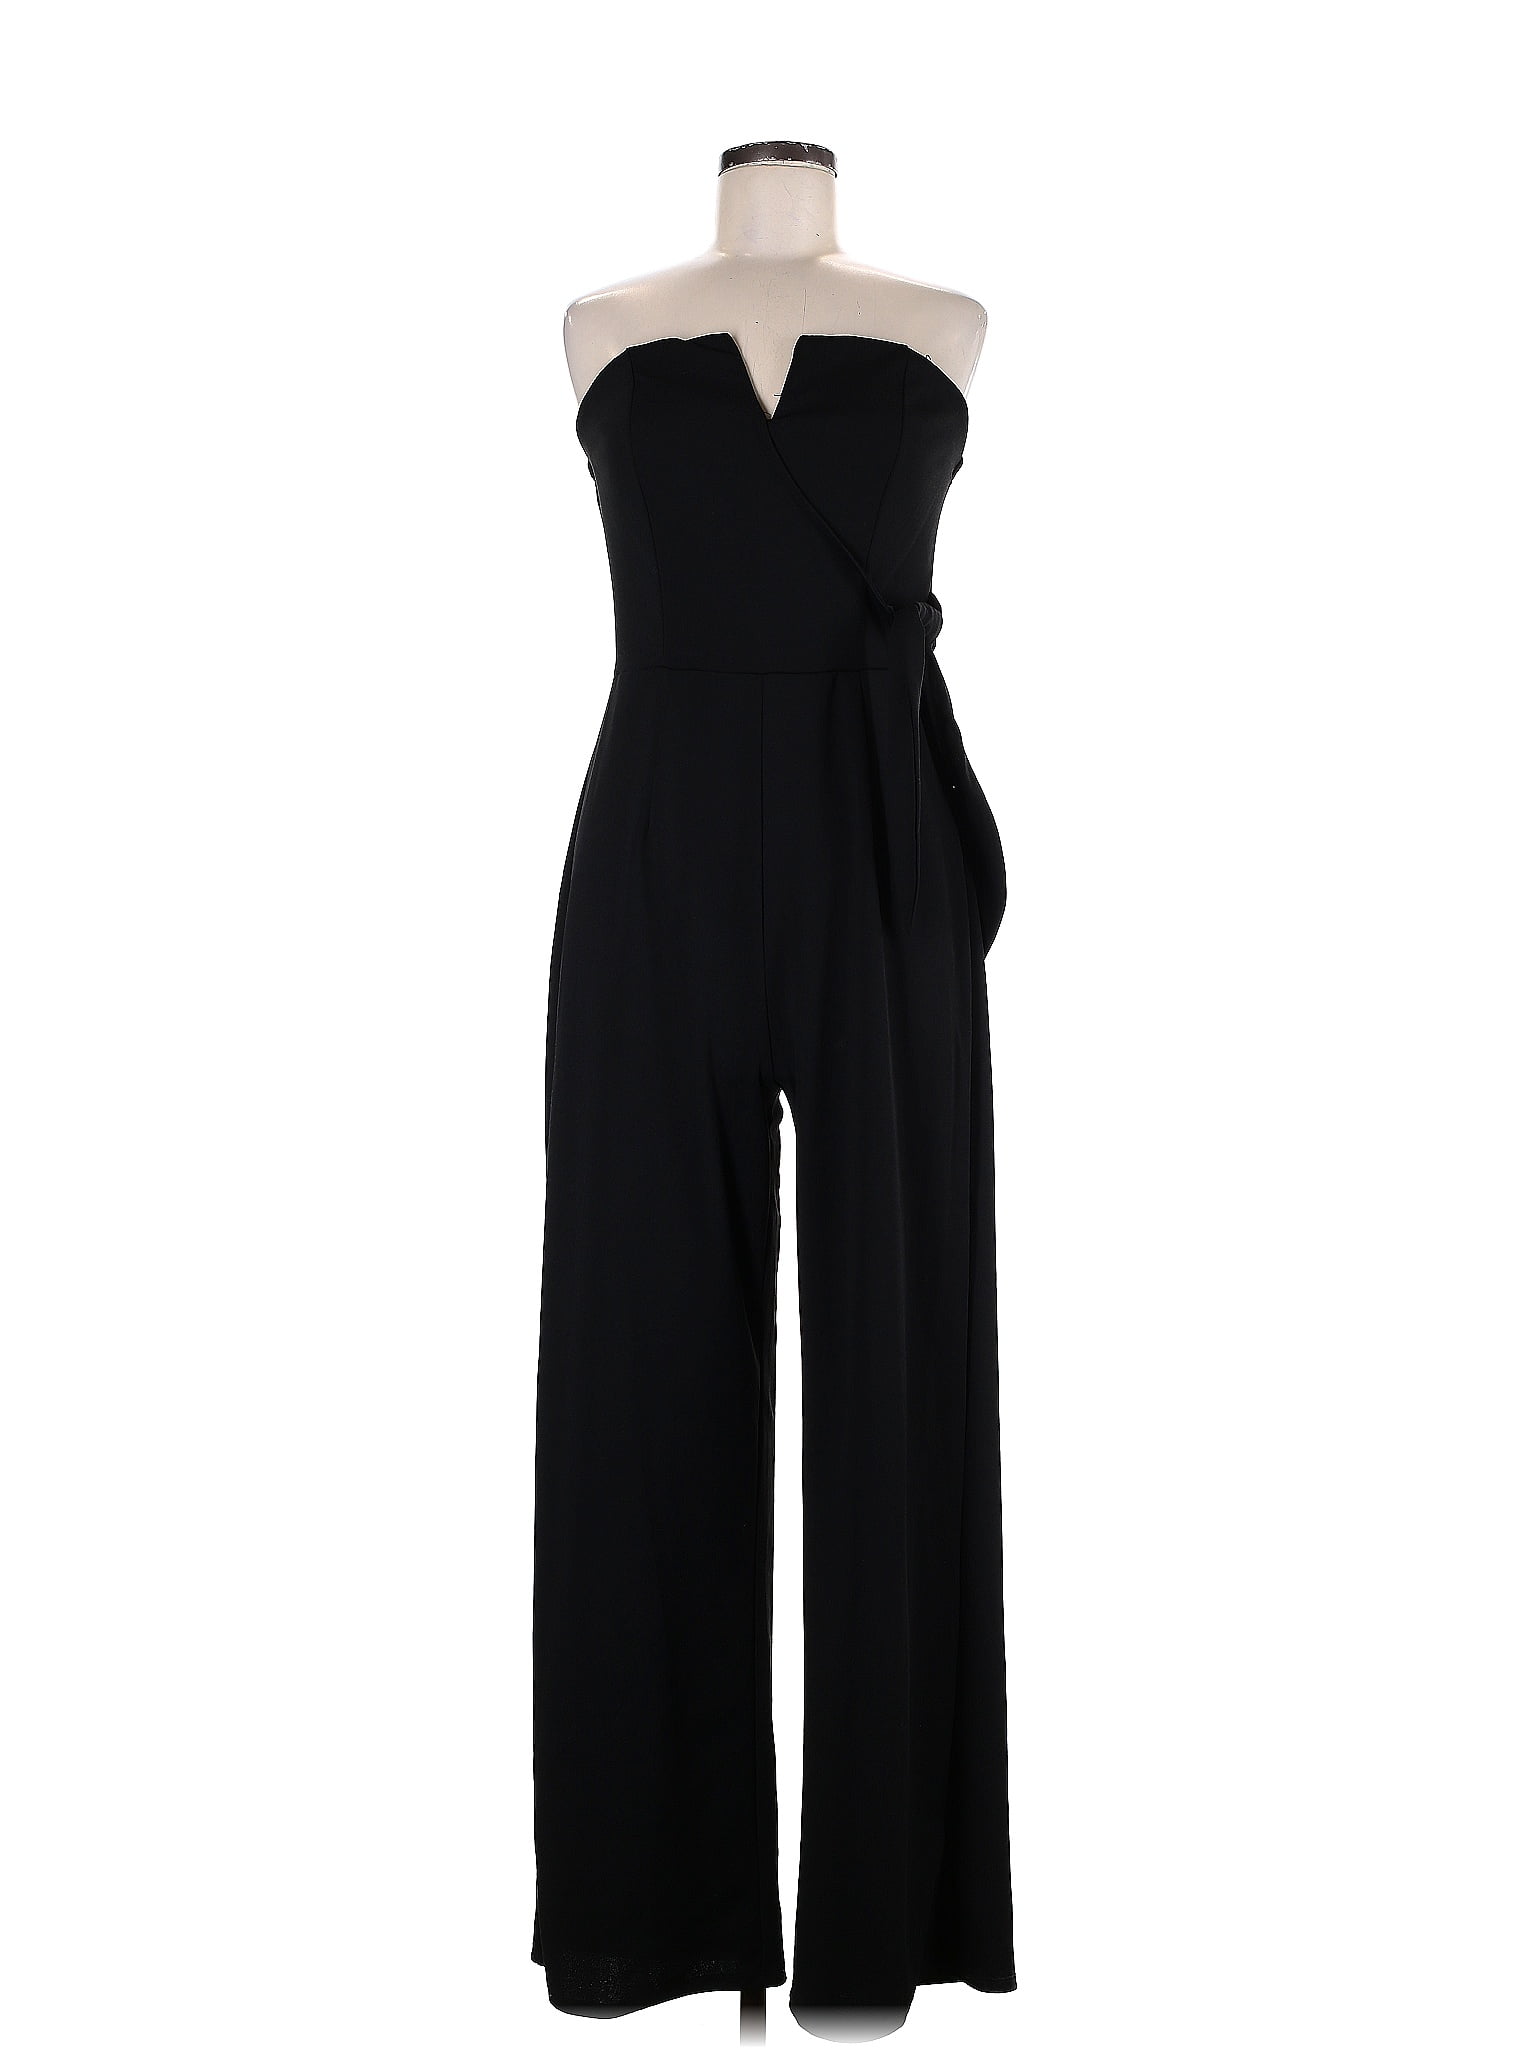 Row A Solid Black Jumpsuit Size M - 40% off | thredUP